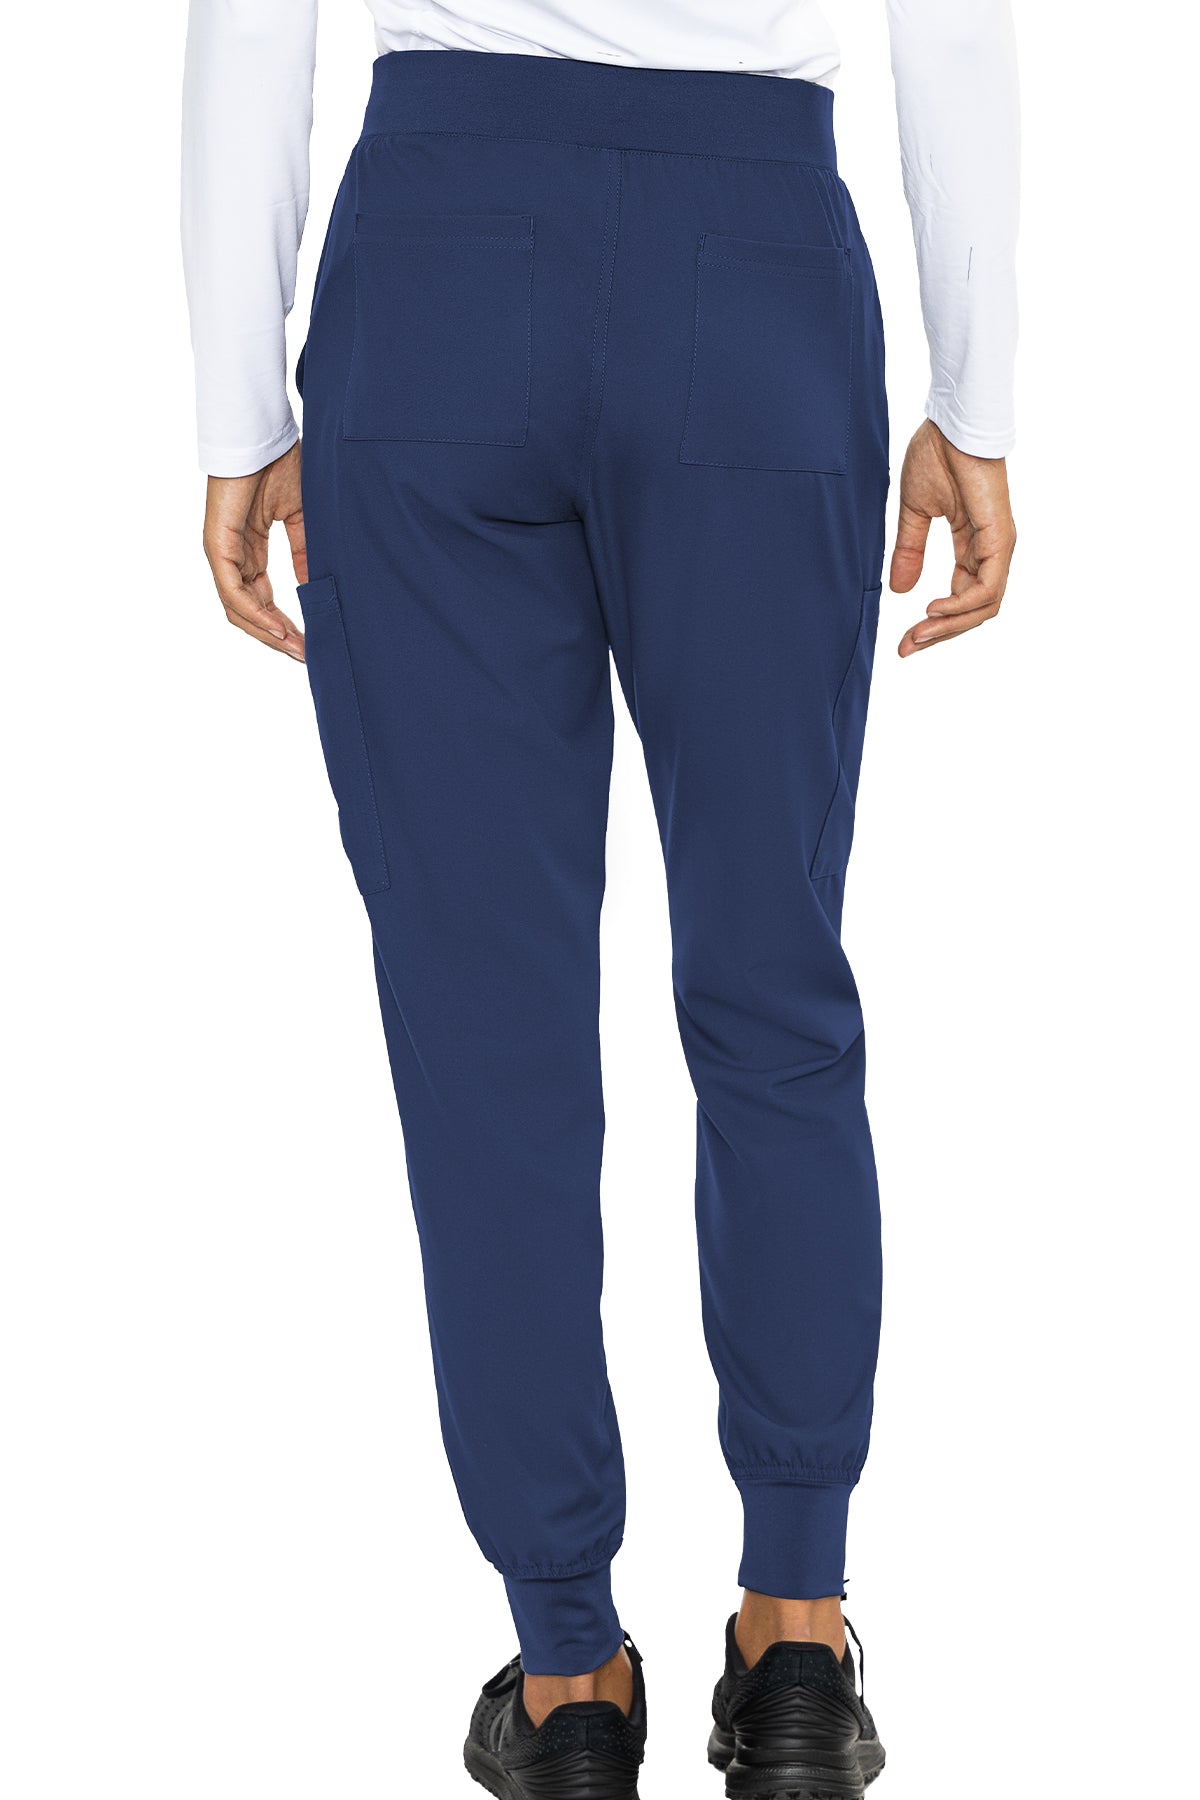 Med Couture Peaches 8721 Seamed Jogger Scrub Pant – Valley West Uniforms